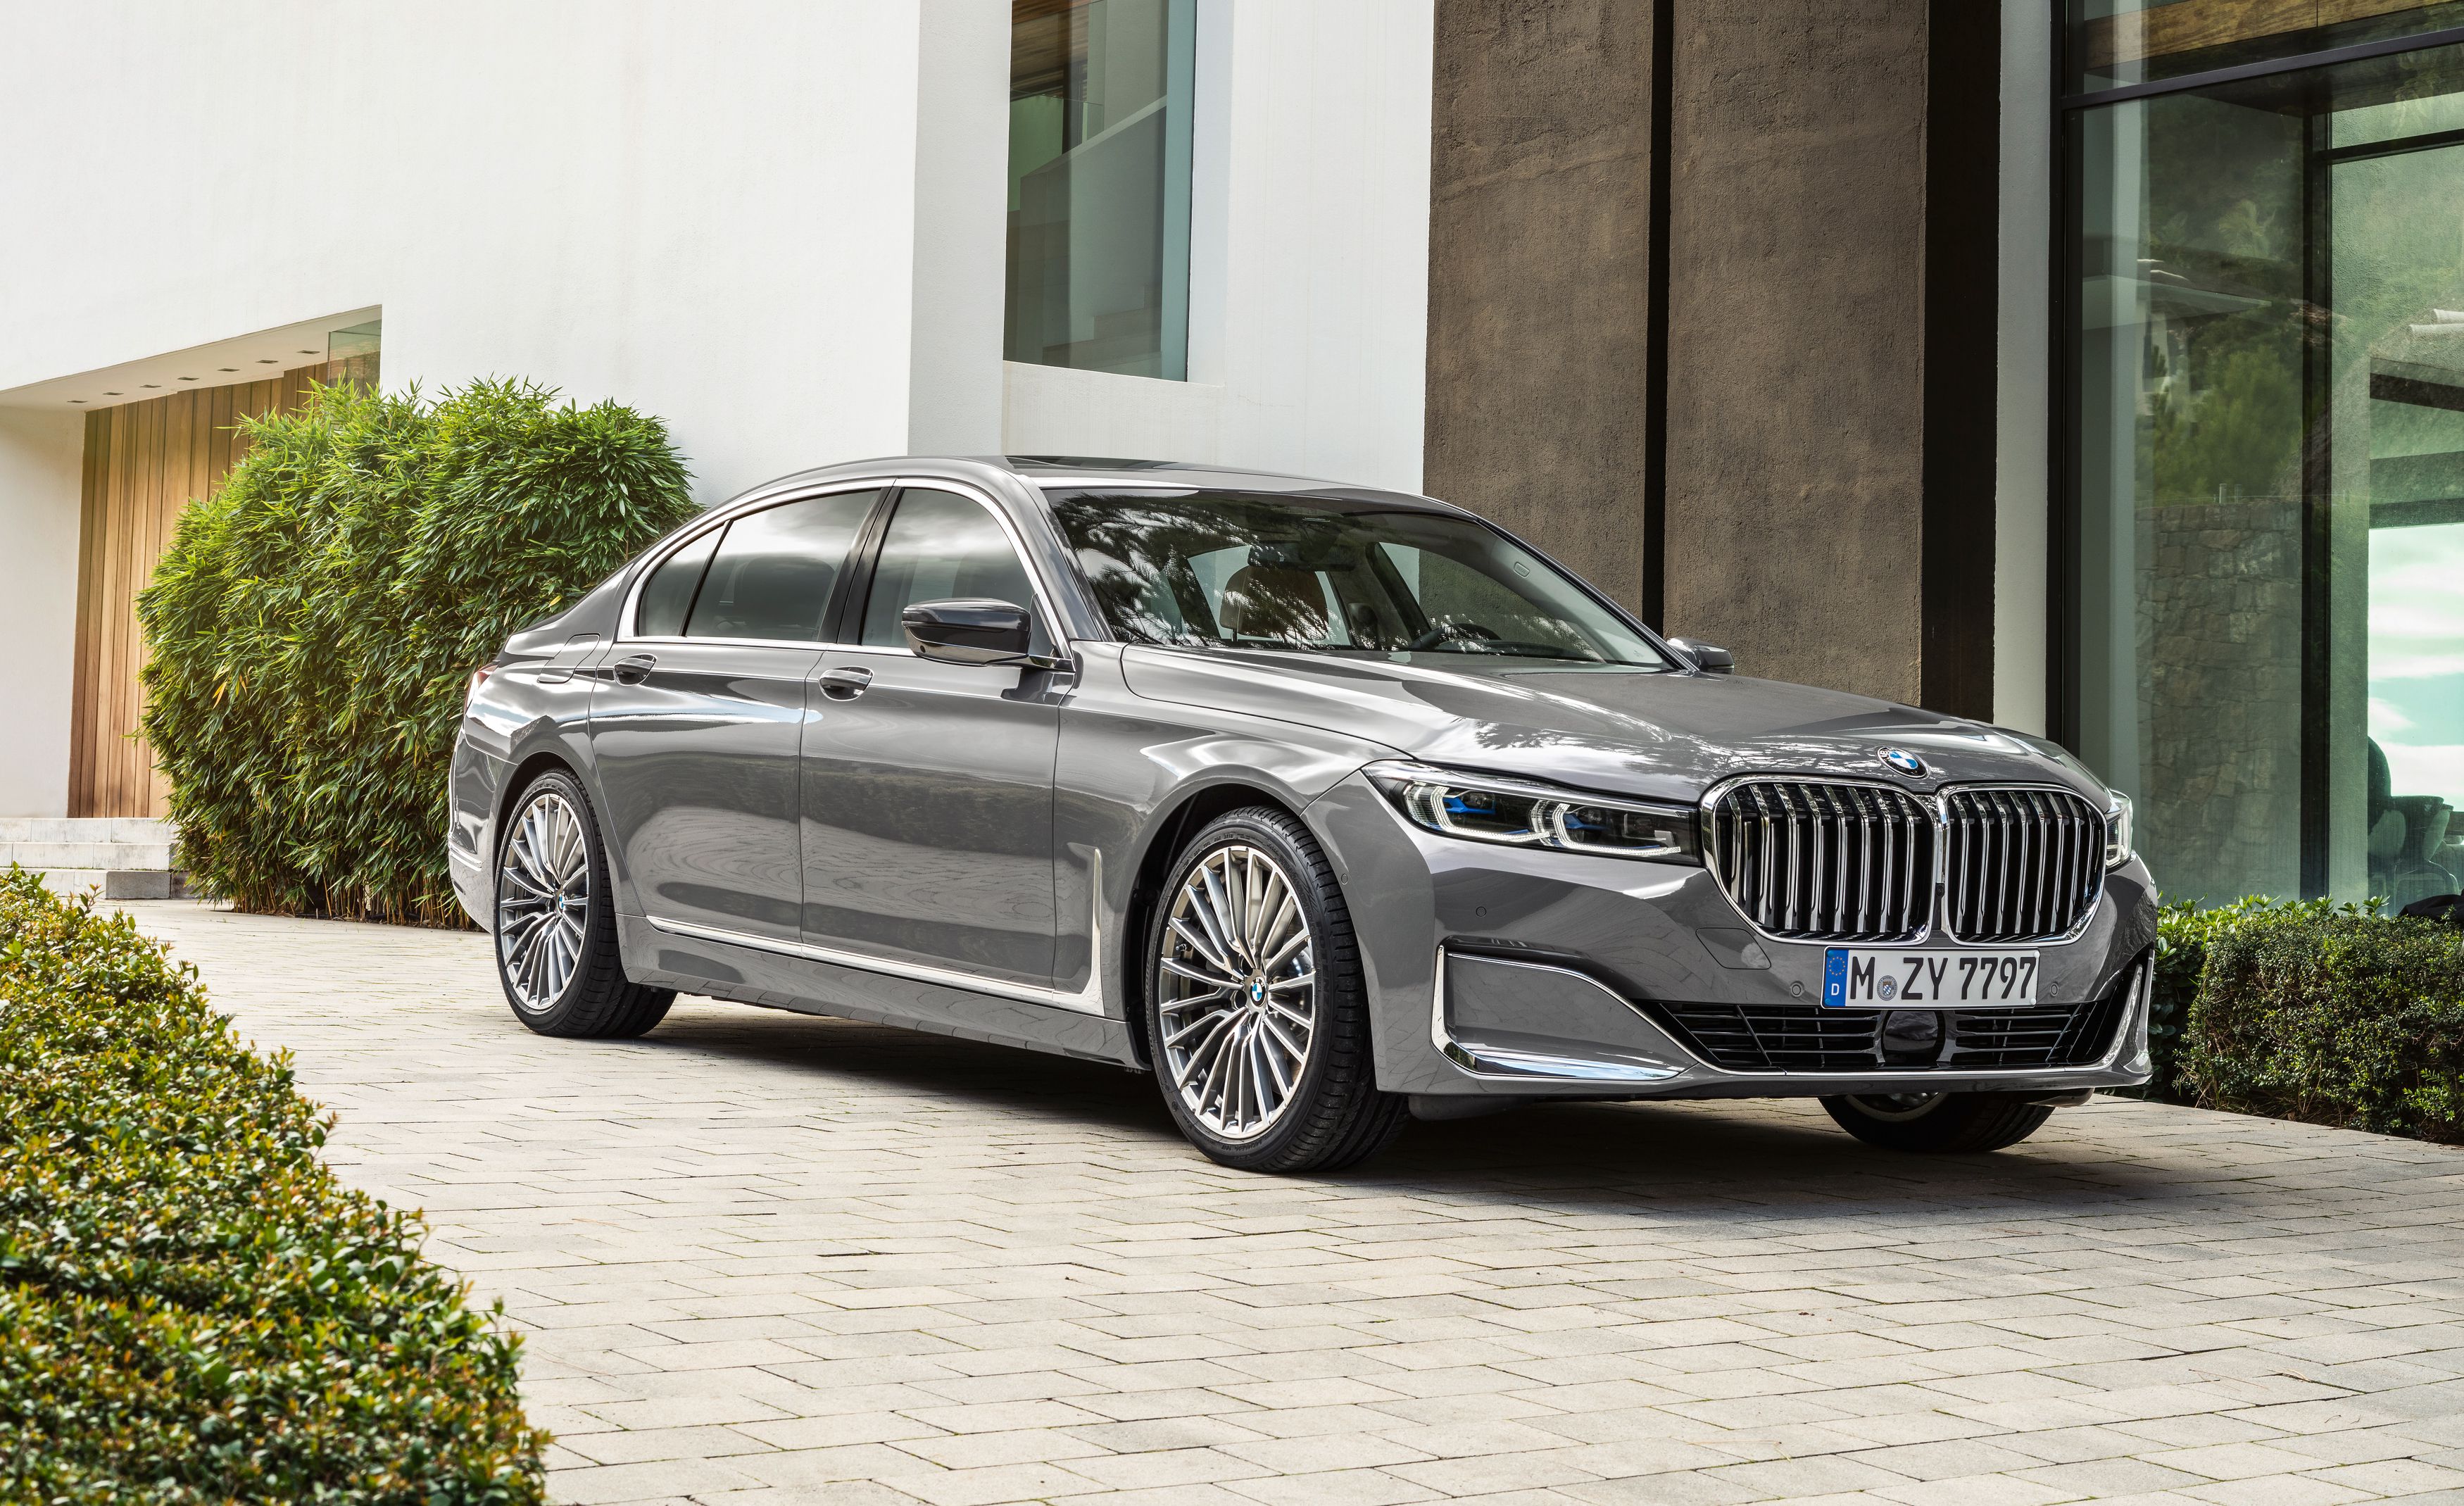 BMW 7 Series Reviews. BMW 7 Series Price, Photo, And Specs